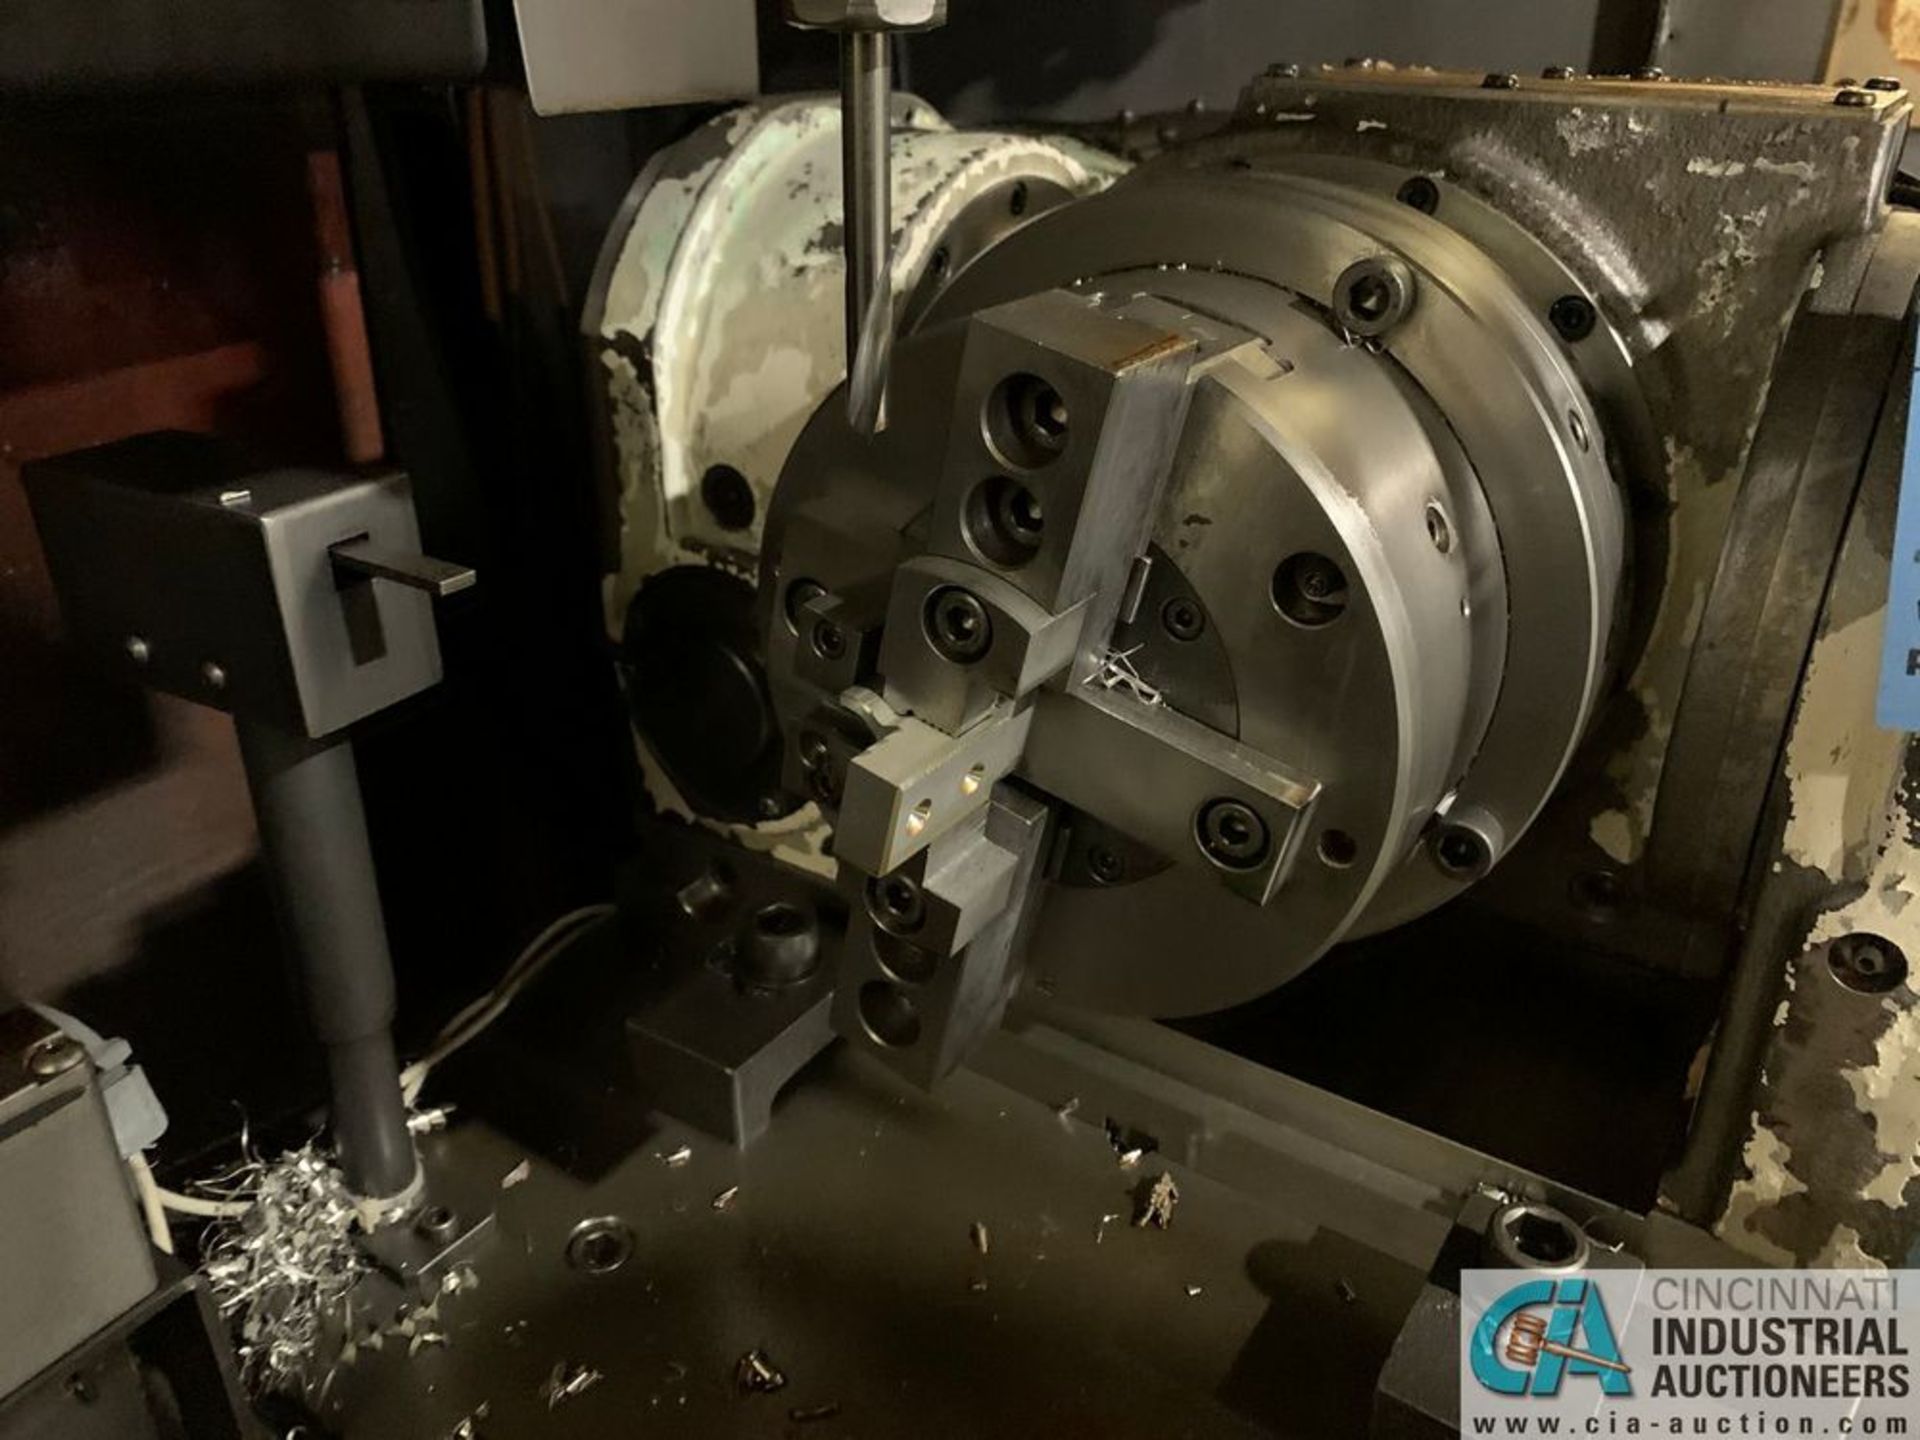 6" 4TH AND 5TH AXIS TRUNION TYPE, 6" TWO-JAW CHUCK *Loading fee due Griner $200.00 price valid 3/19* - Image 2 of 3